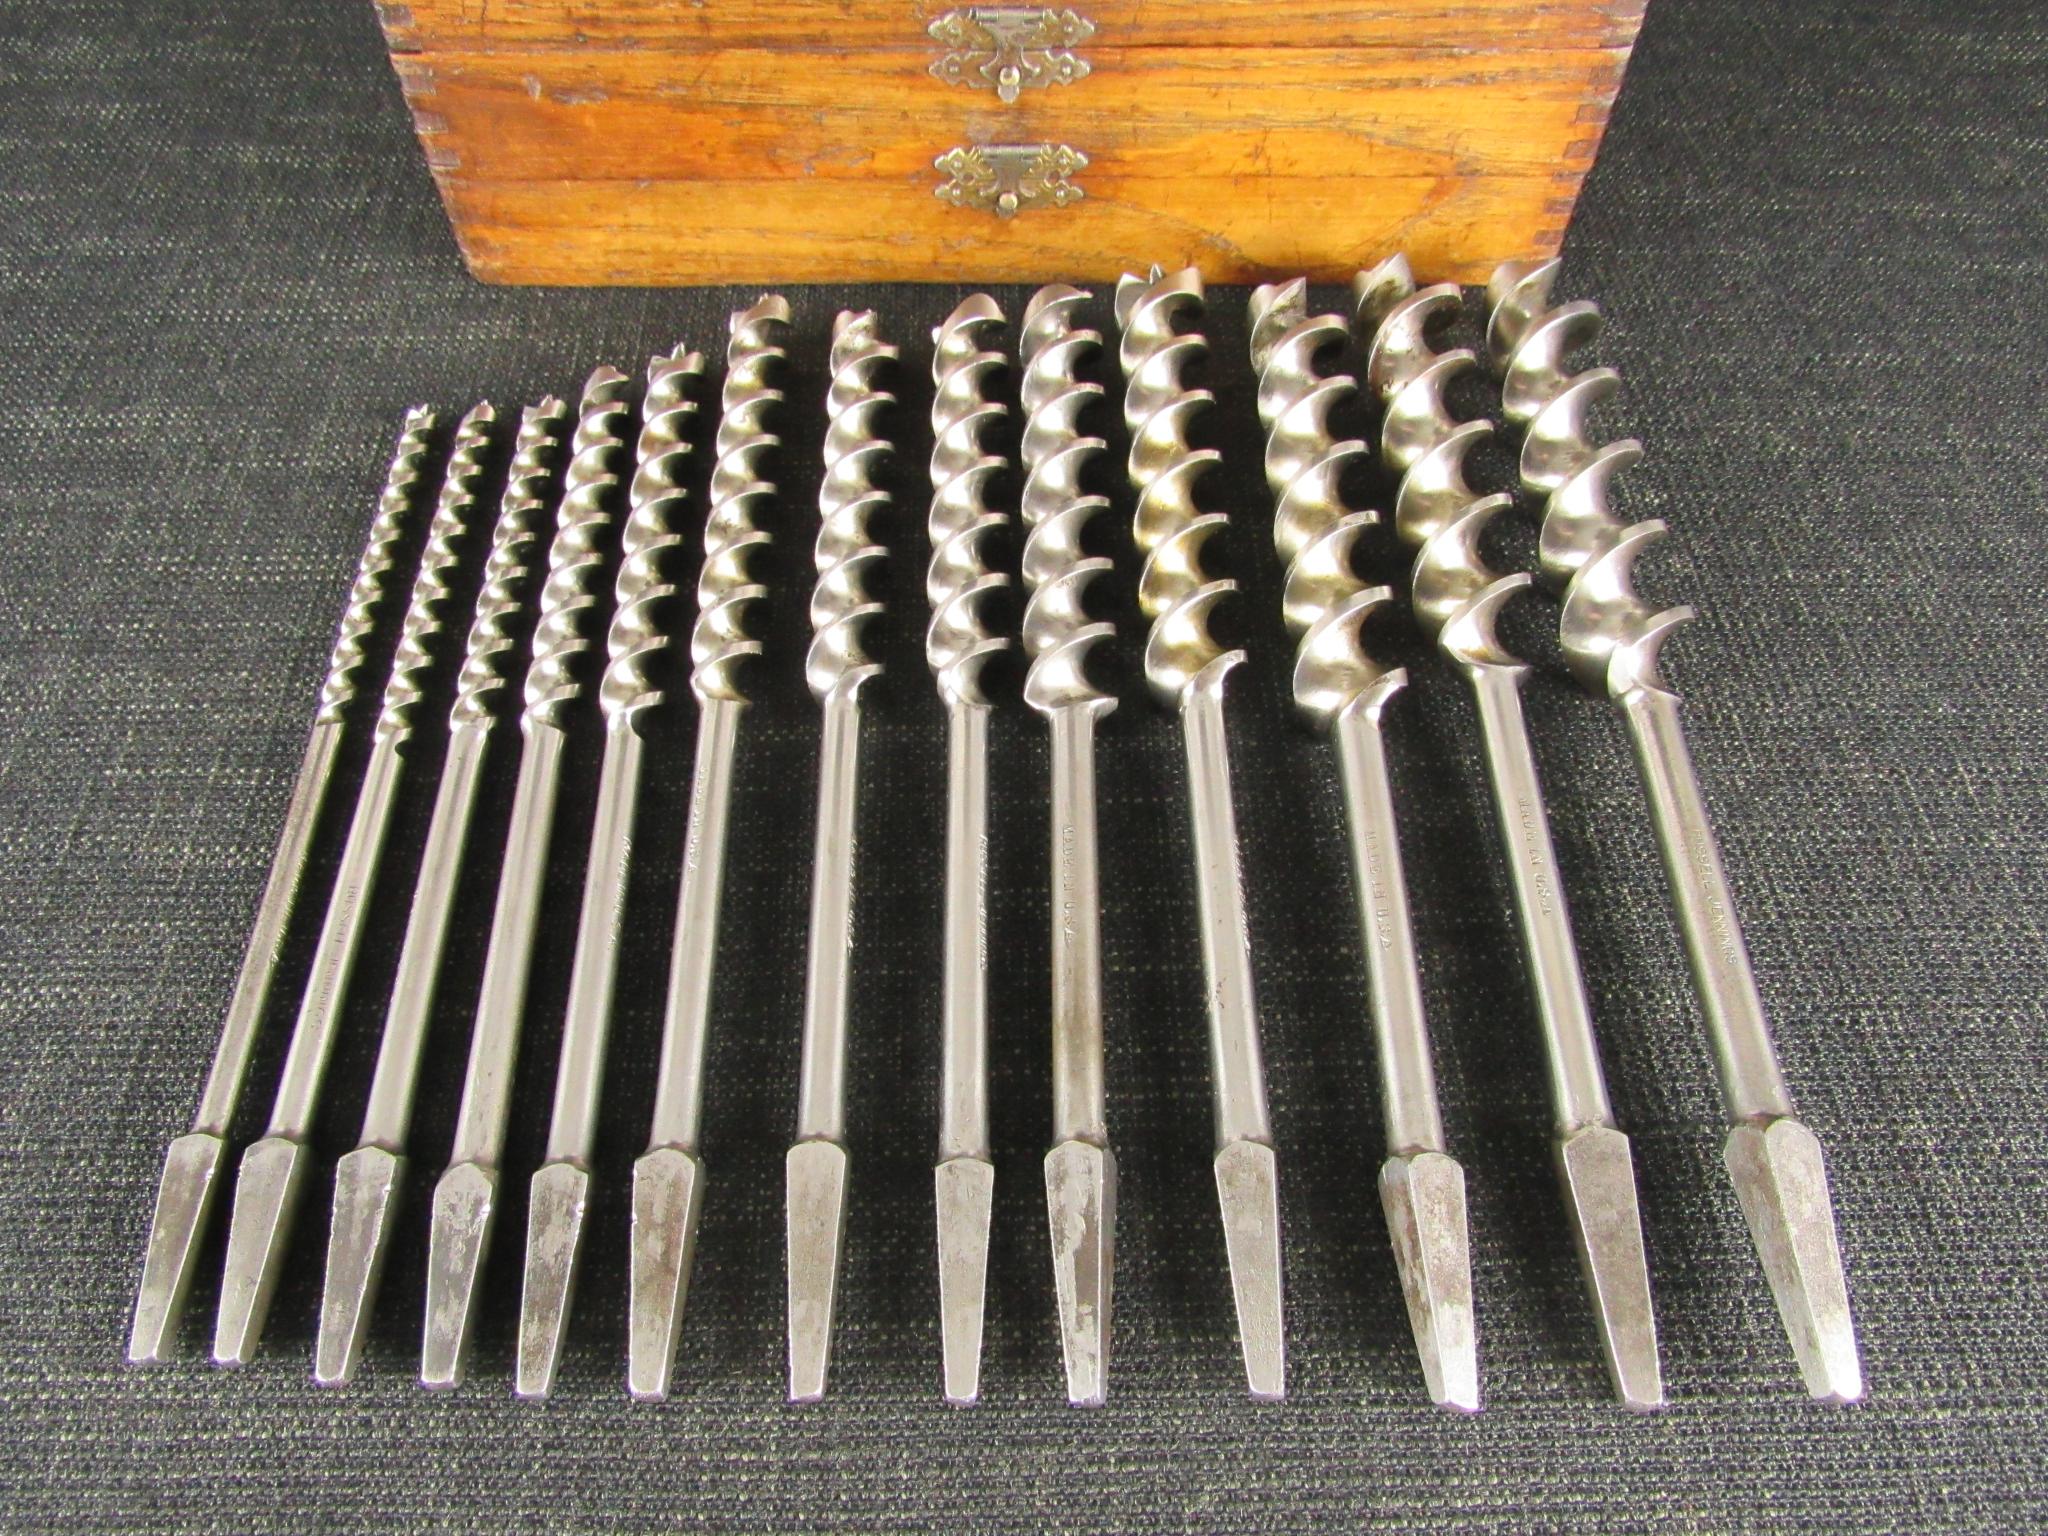 Tool Box, Auger or Drill Bit Box, Russell Jennings Company